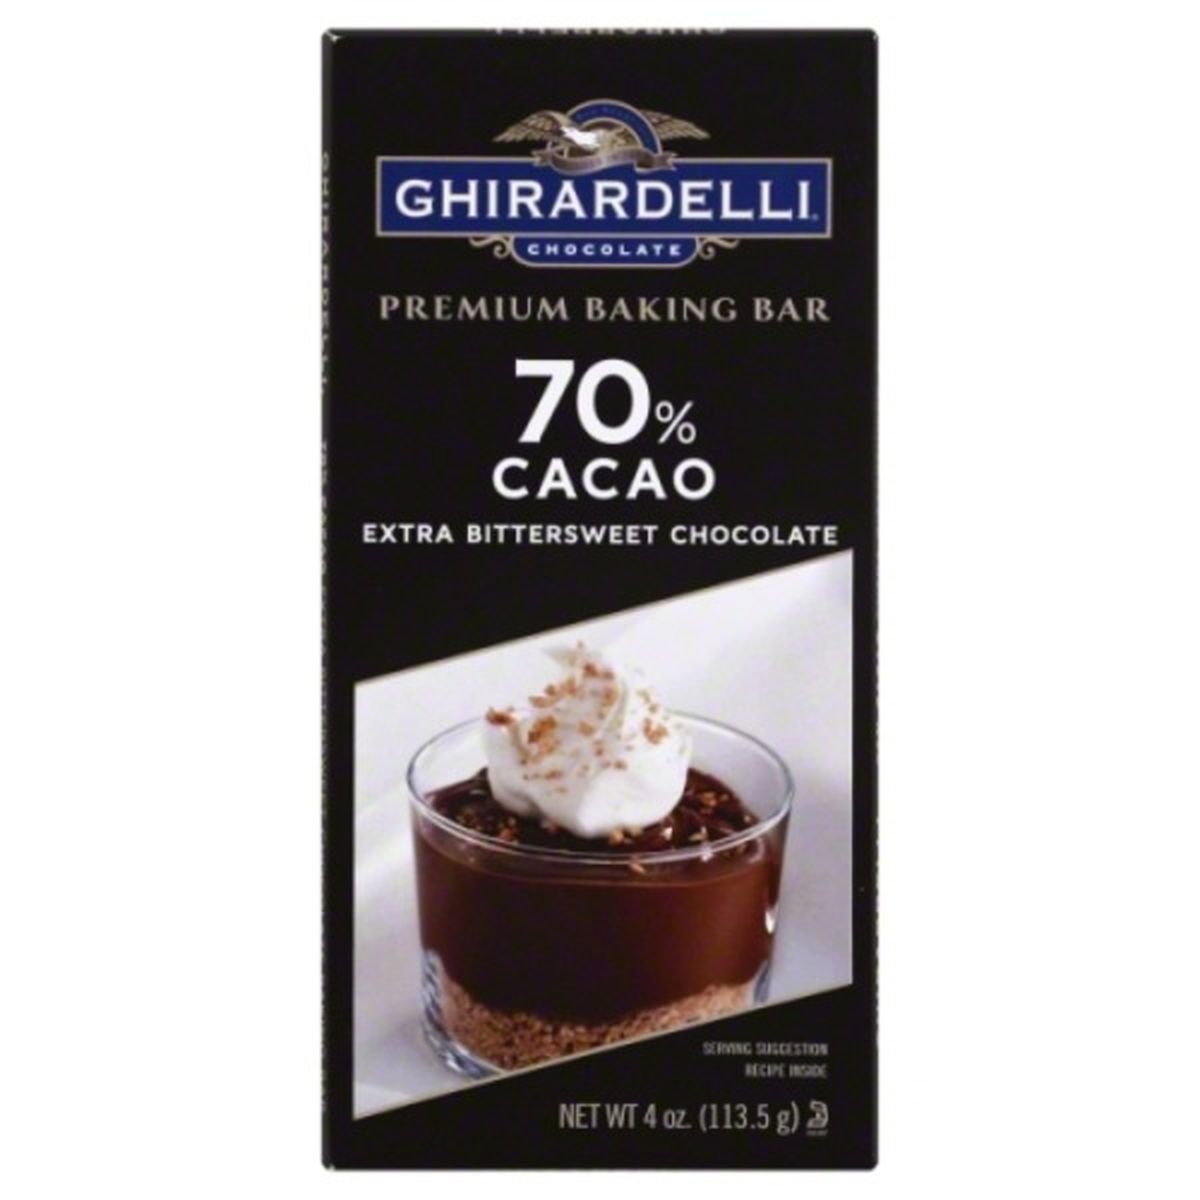 Calories in Ghirardelli Baking Bar, Premium, Extra Bittersweet Chocolate, 70% Cacao